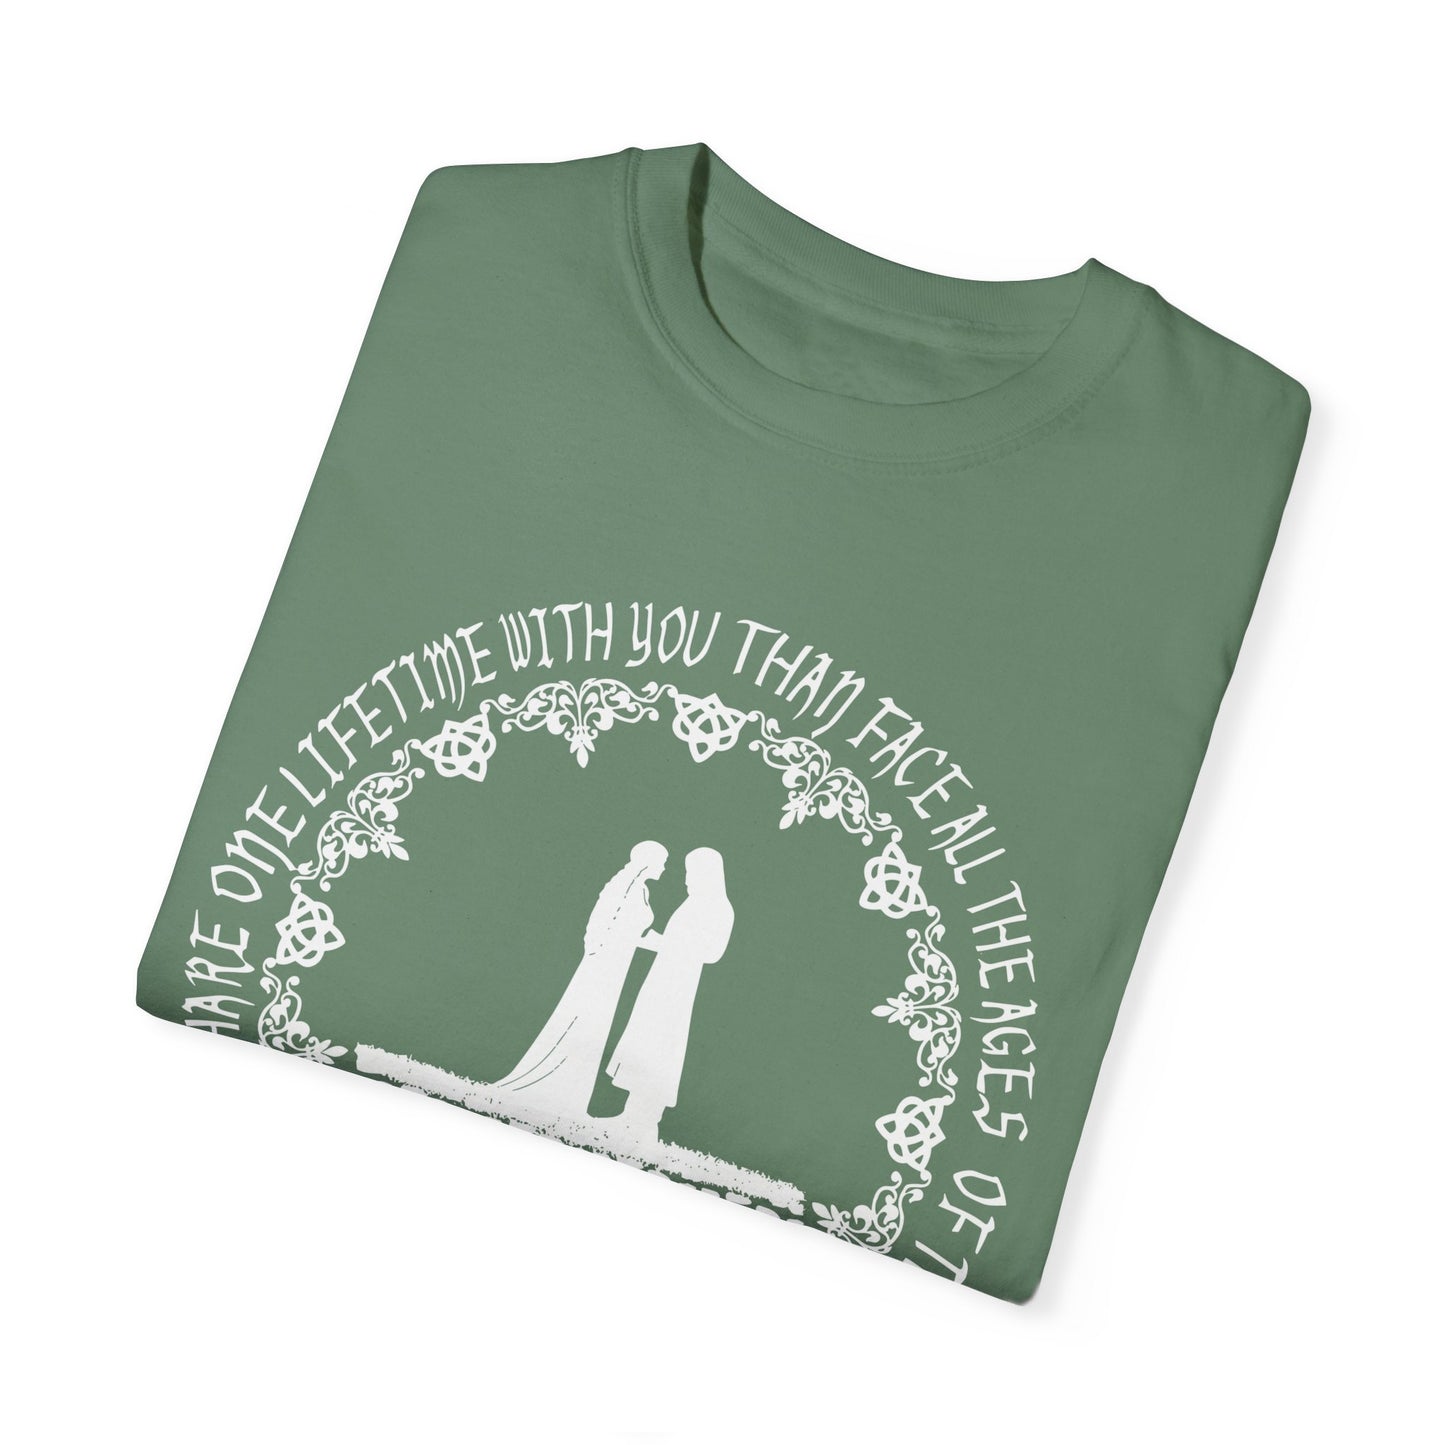 Aragorn & Arwen T-shirt - Lord of the Rings